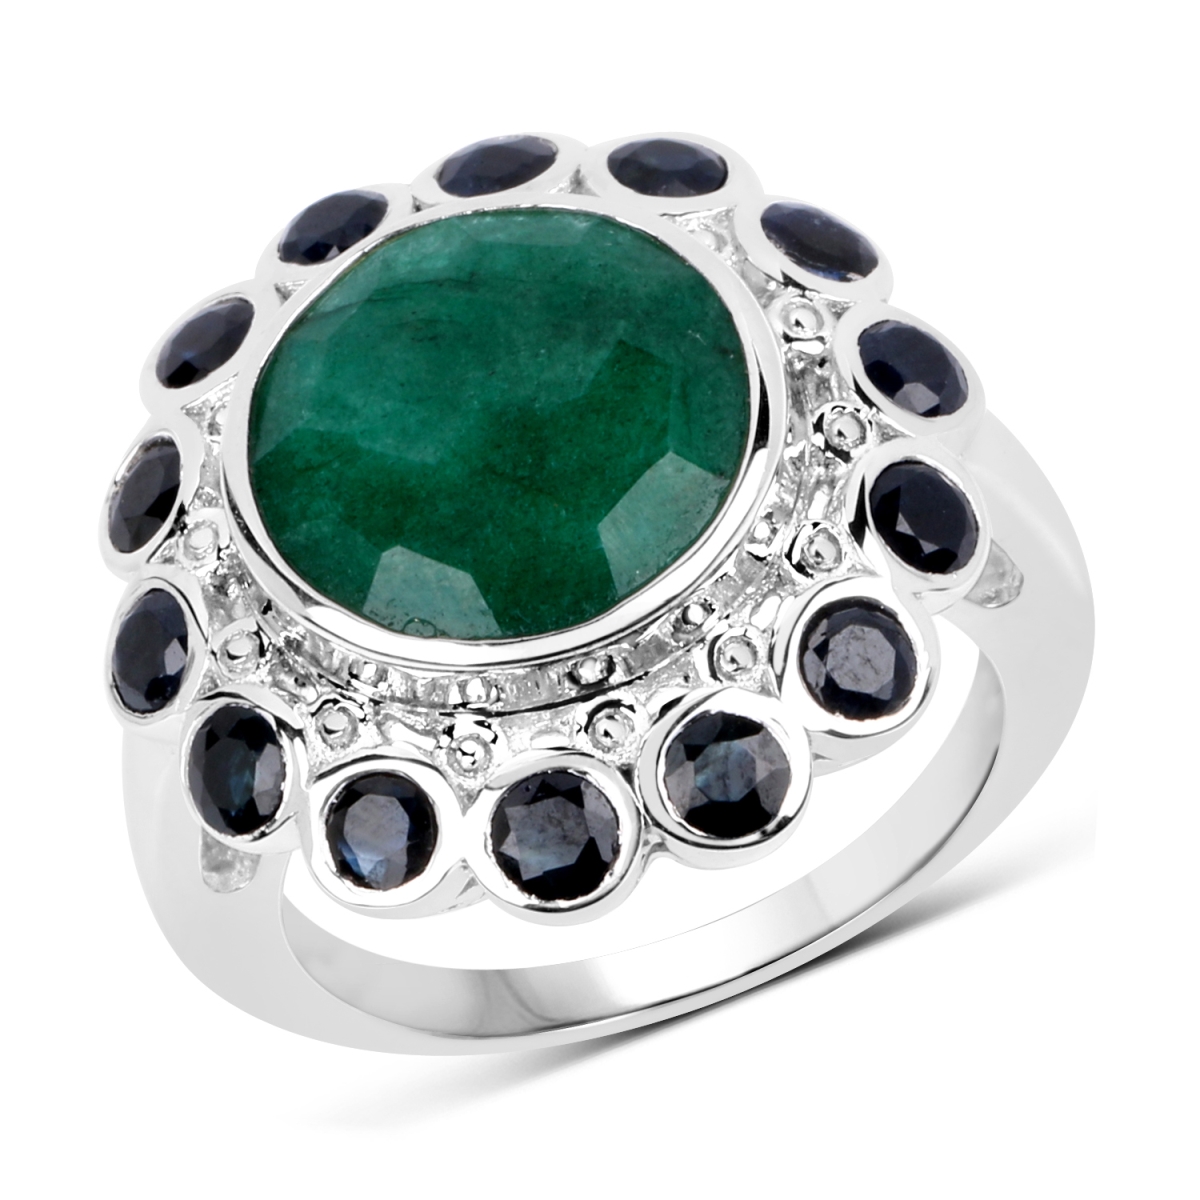 Picture of Malaika QR8237DYEDEBS-SSR-9 6.88 Carat Dyed Emerald & Blue Sapphire 0.925 Sterling Silver Ring